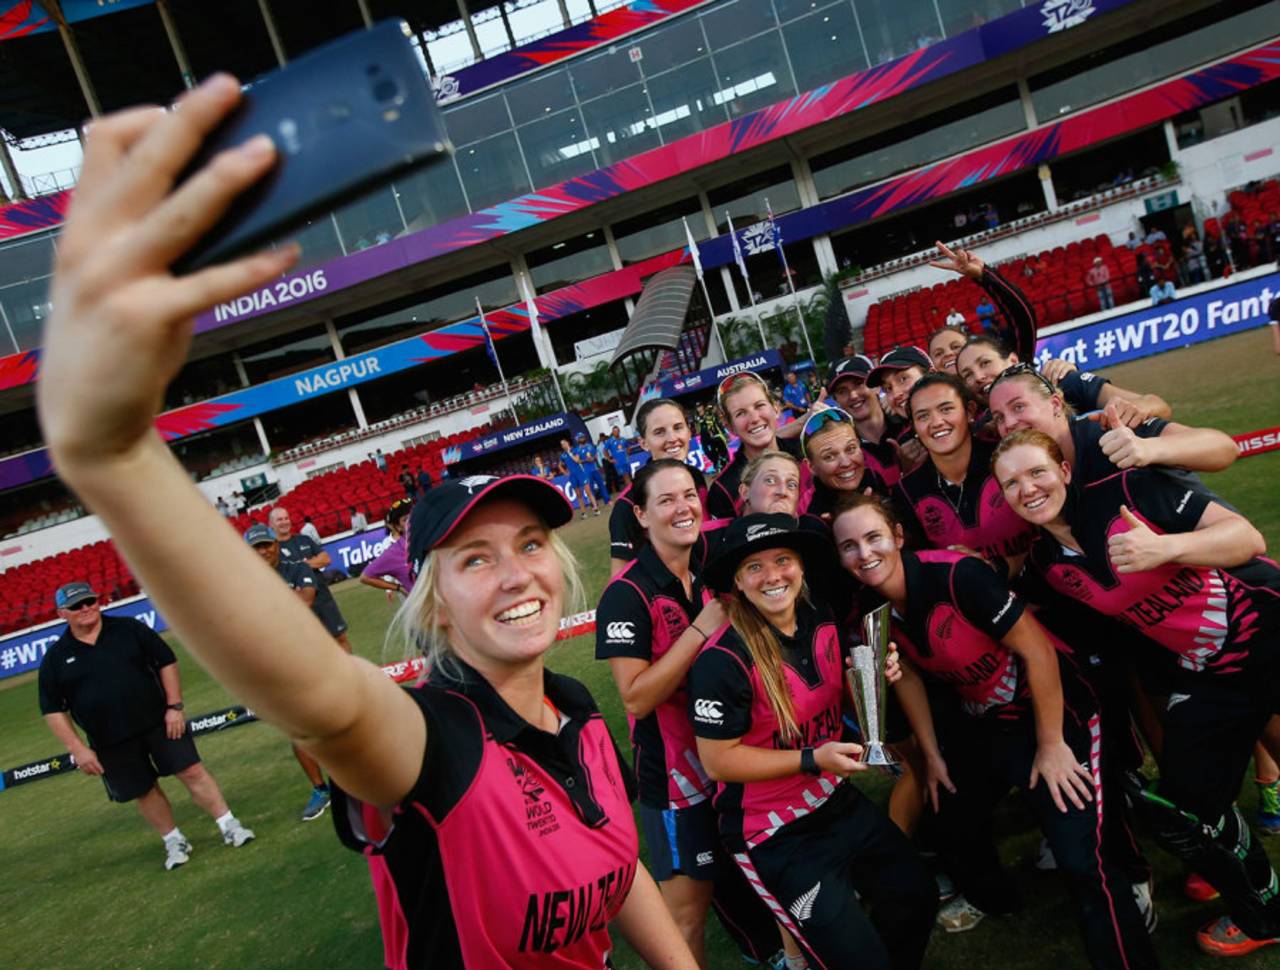 Leigh Kasperek (holding the trophy) poses for a selfie with her team-mates, Australia v New Zealand, Women's World T20 2016, Group A, Nagpur, March 21, 2016